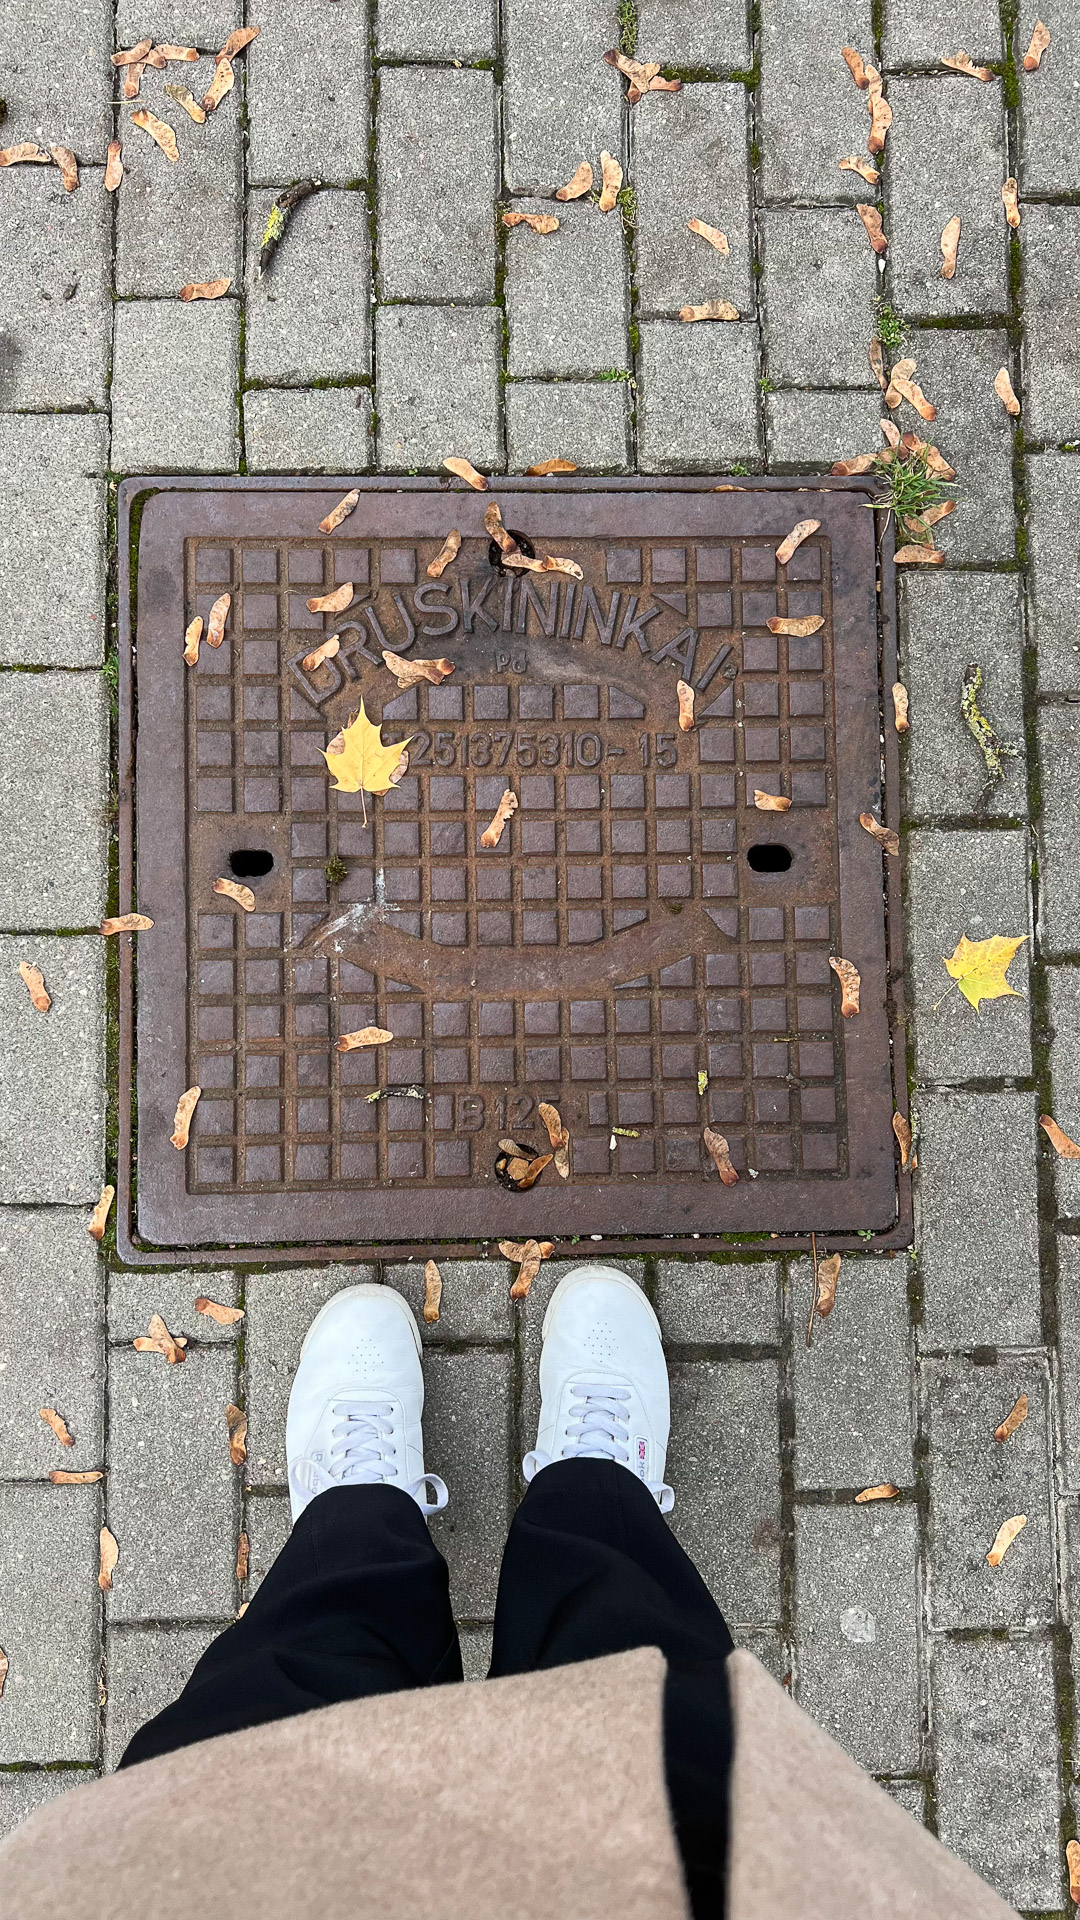 person with brown jacket black pants white reebok shoes standing over a manhole cover saying druskininkai